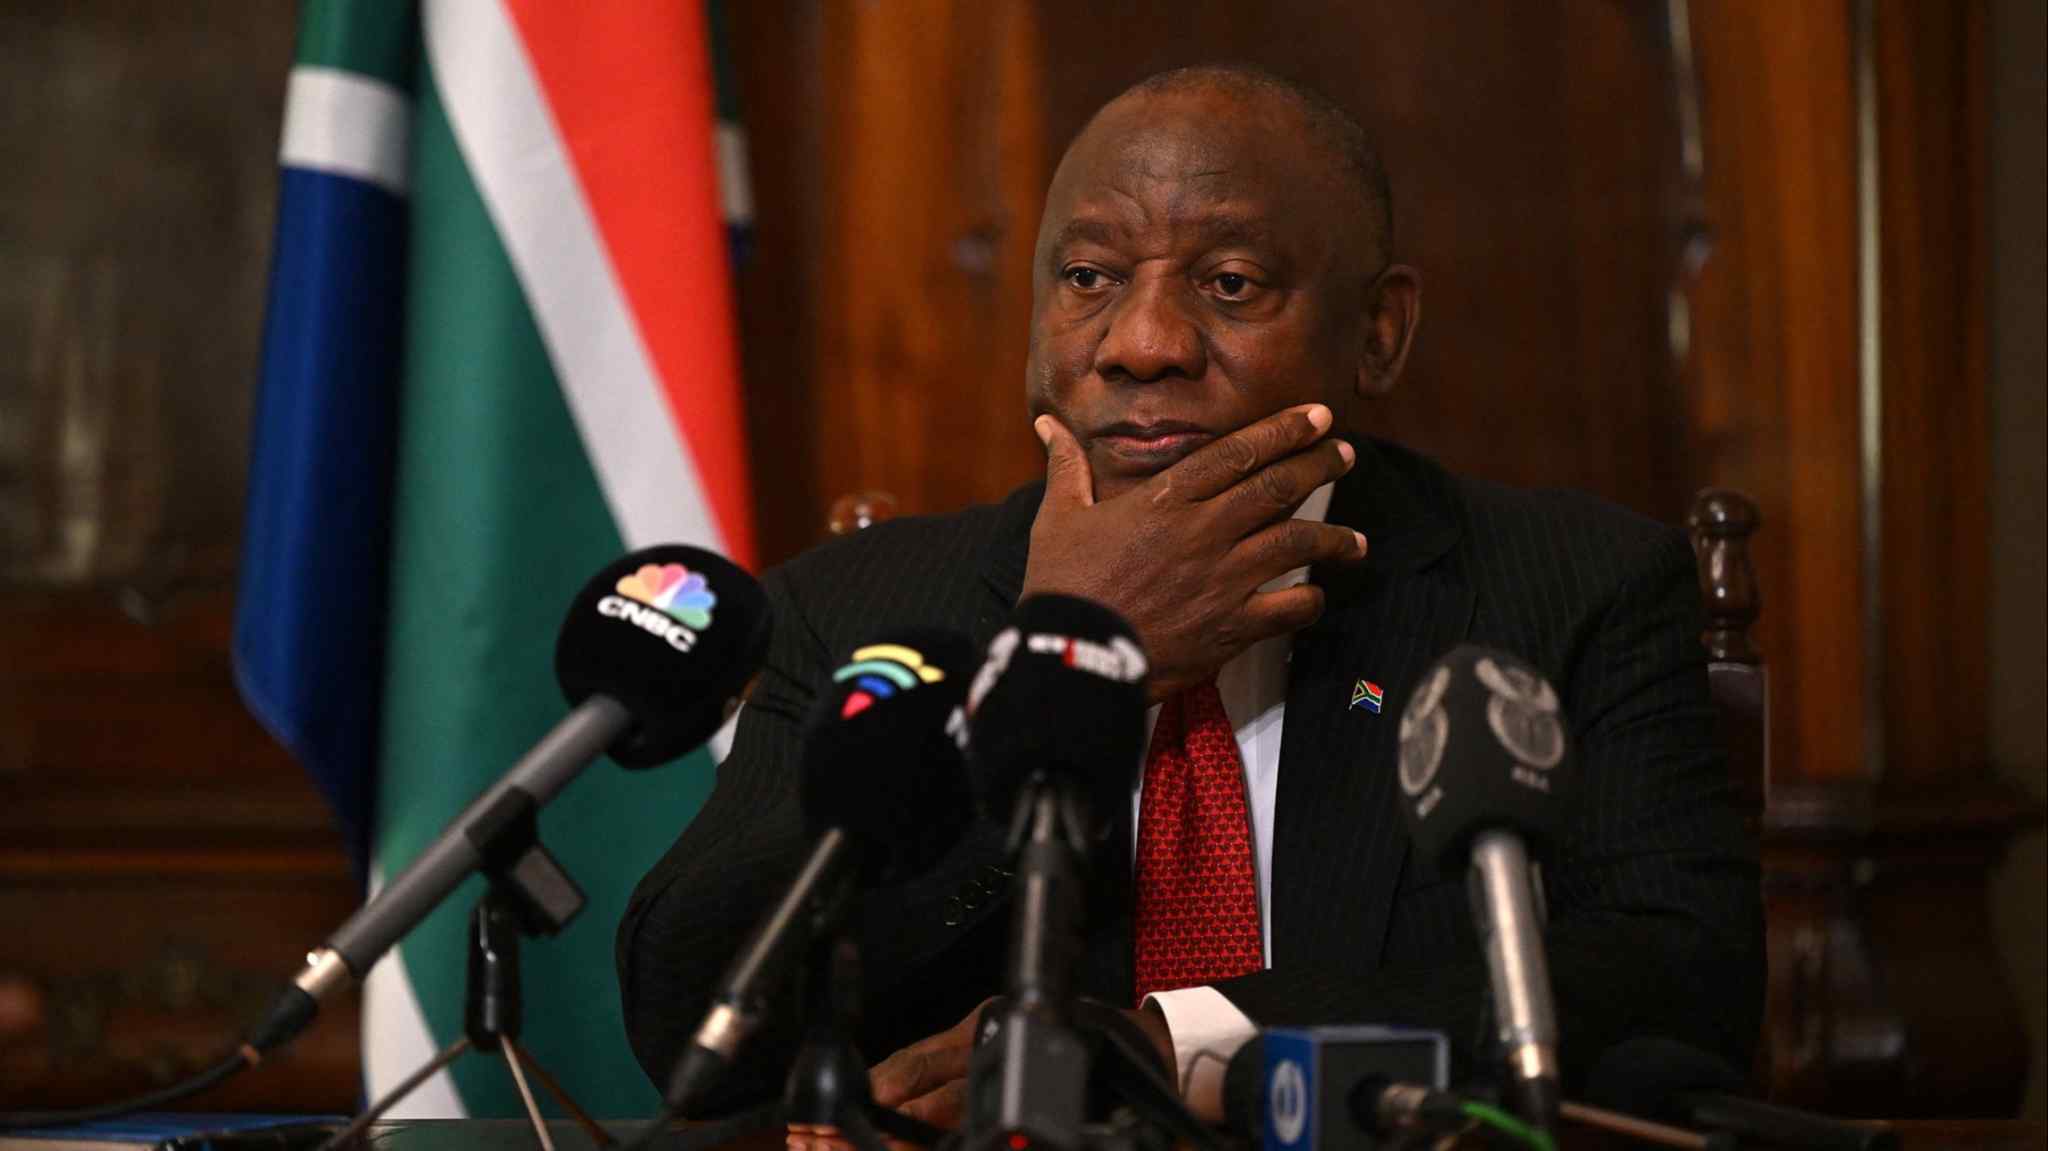 Cyril Ramaphosa’s presidency under threat after panel finds he ‘abused position’